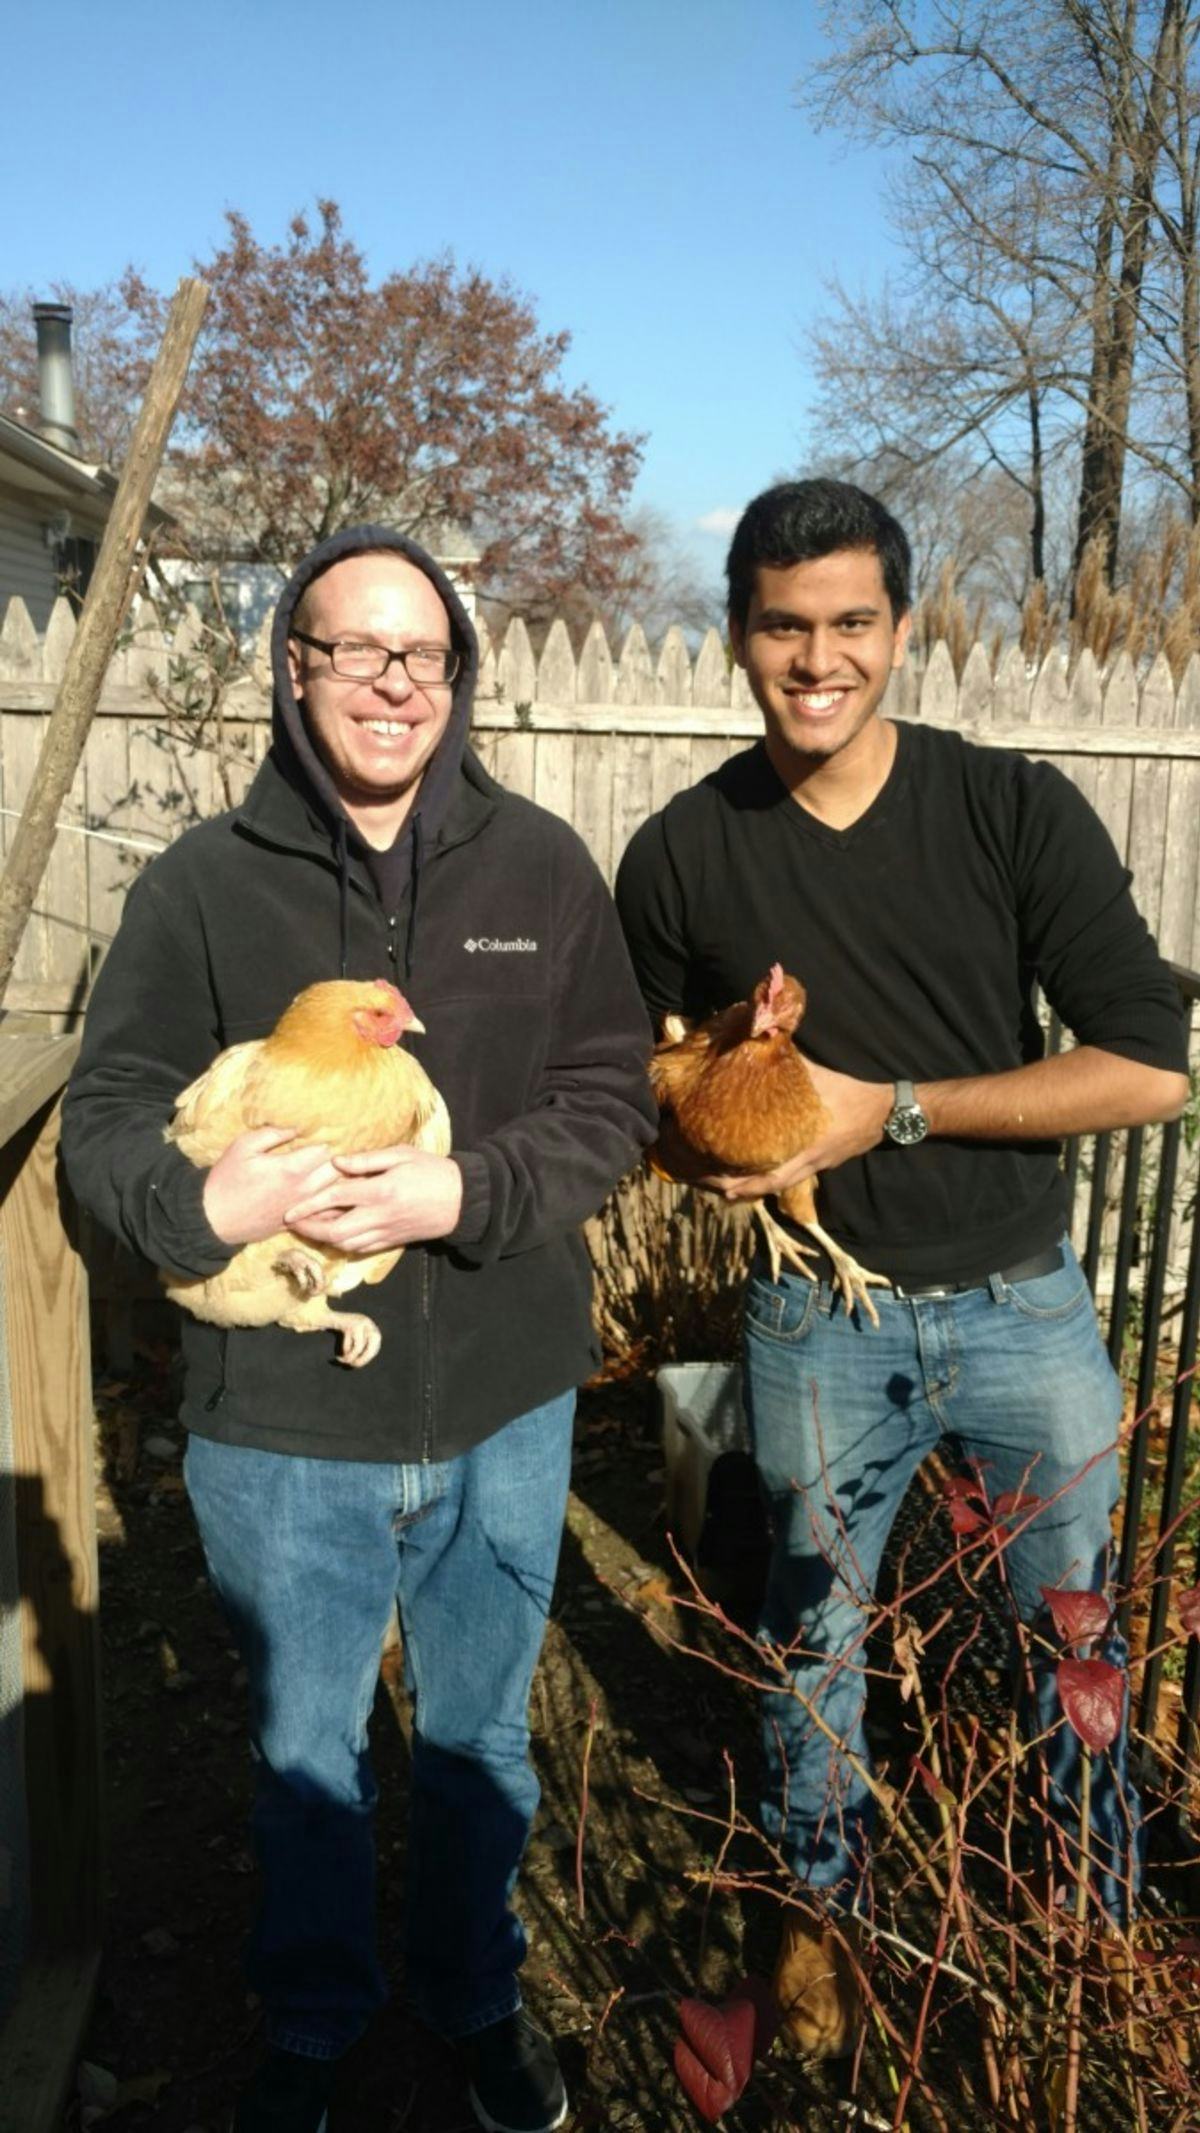 John McKenna and Ravi Shah, holding some of Professor Fontaine's chickens